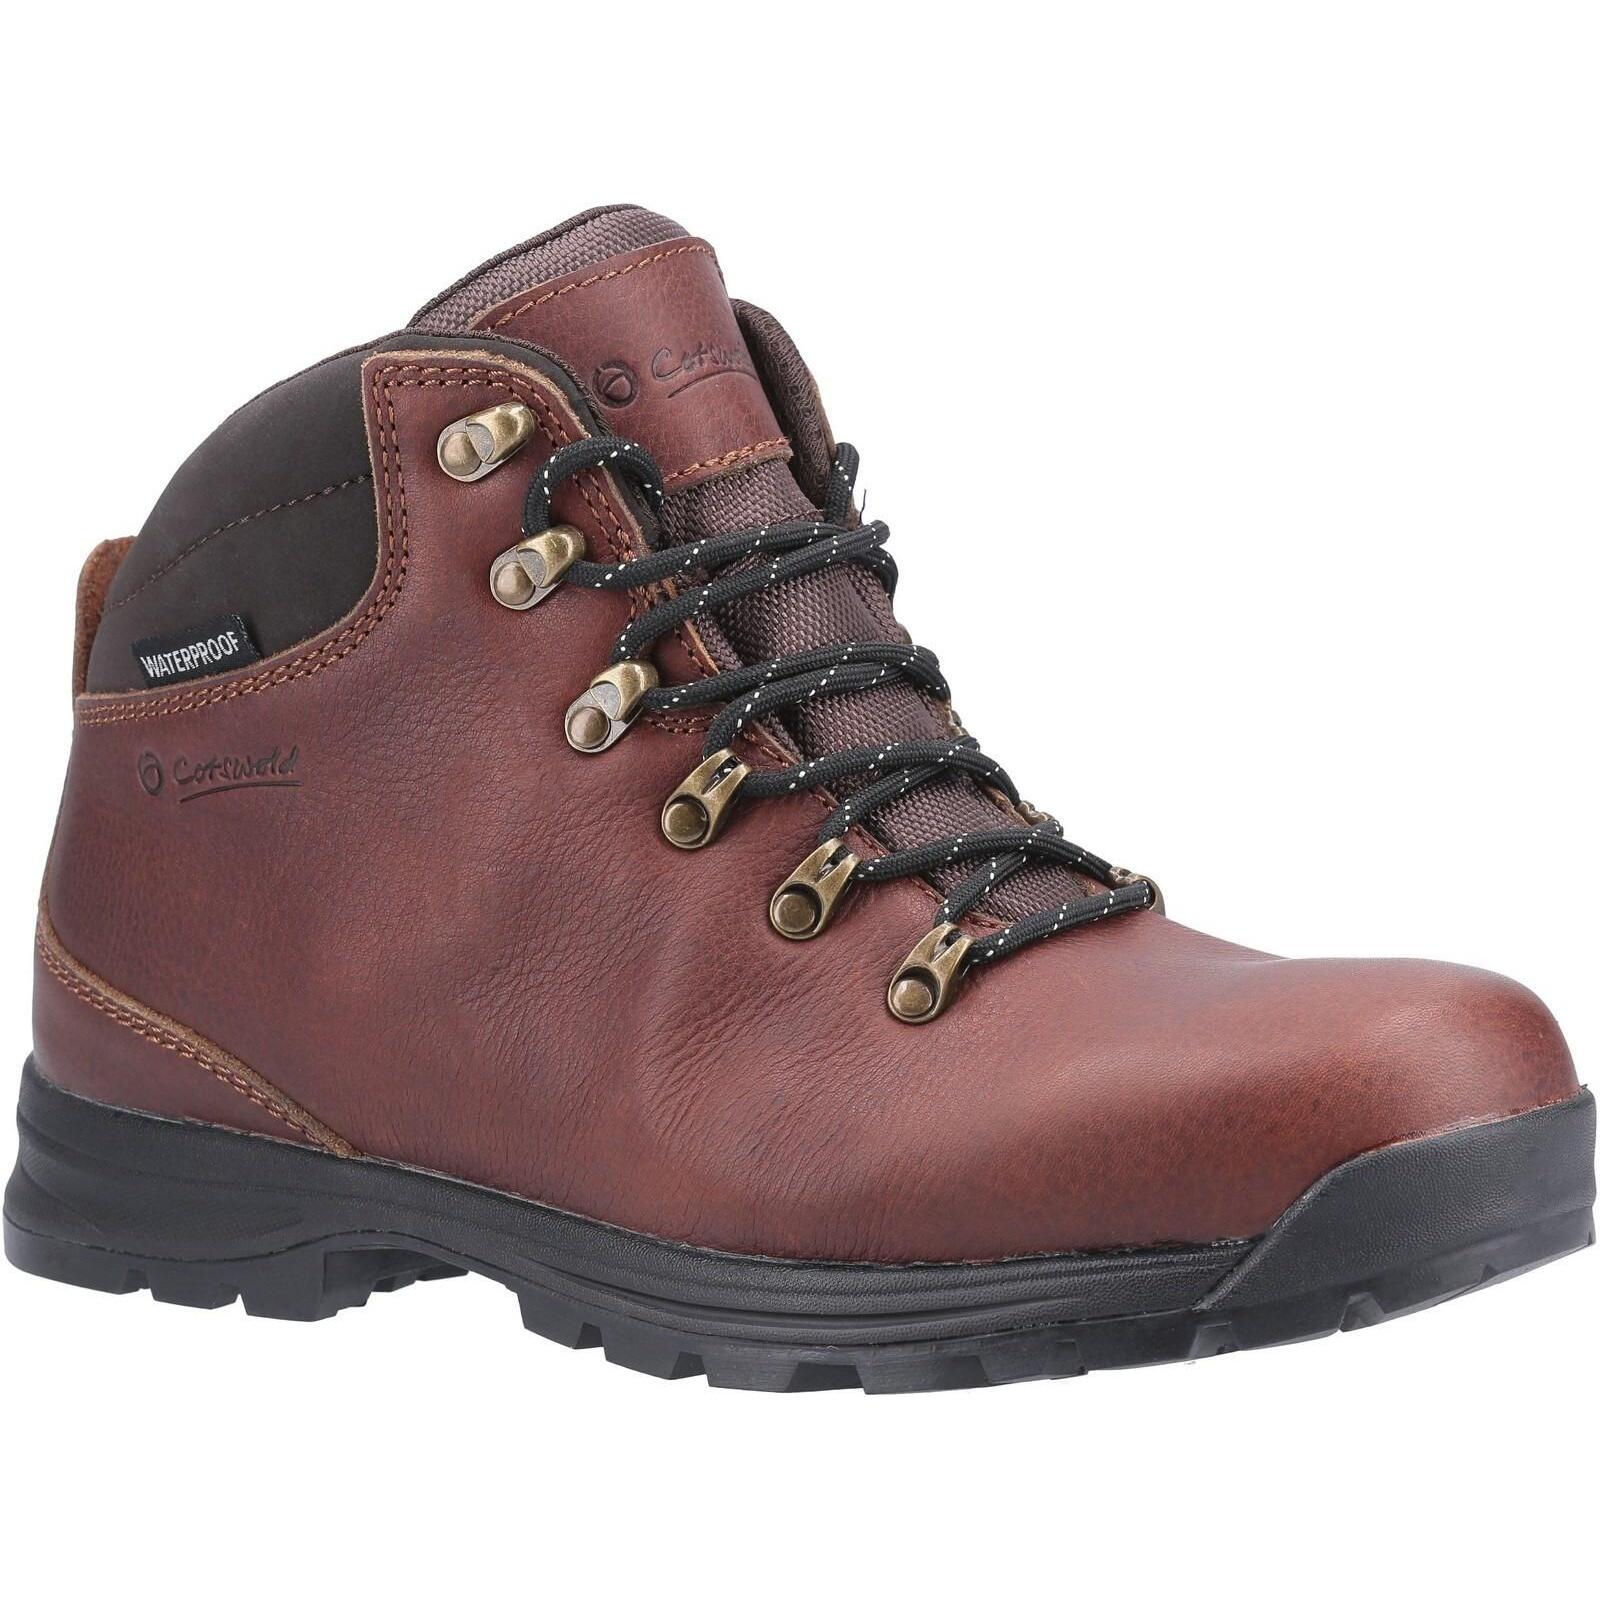 COTSWOLD Kingsway Mens Lace Up Leather Hiking Boot (Brown)